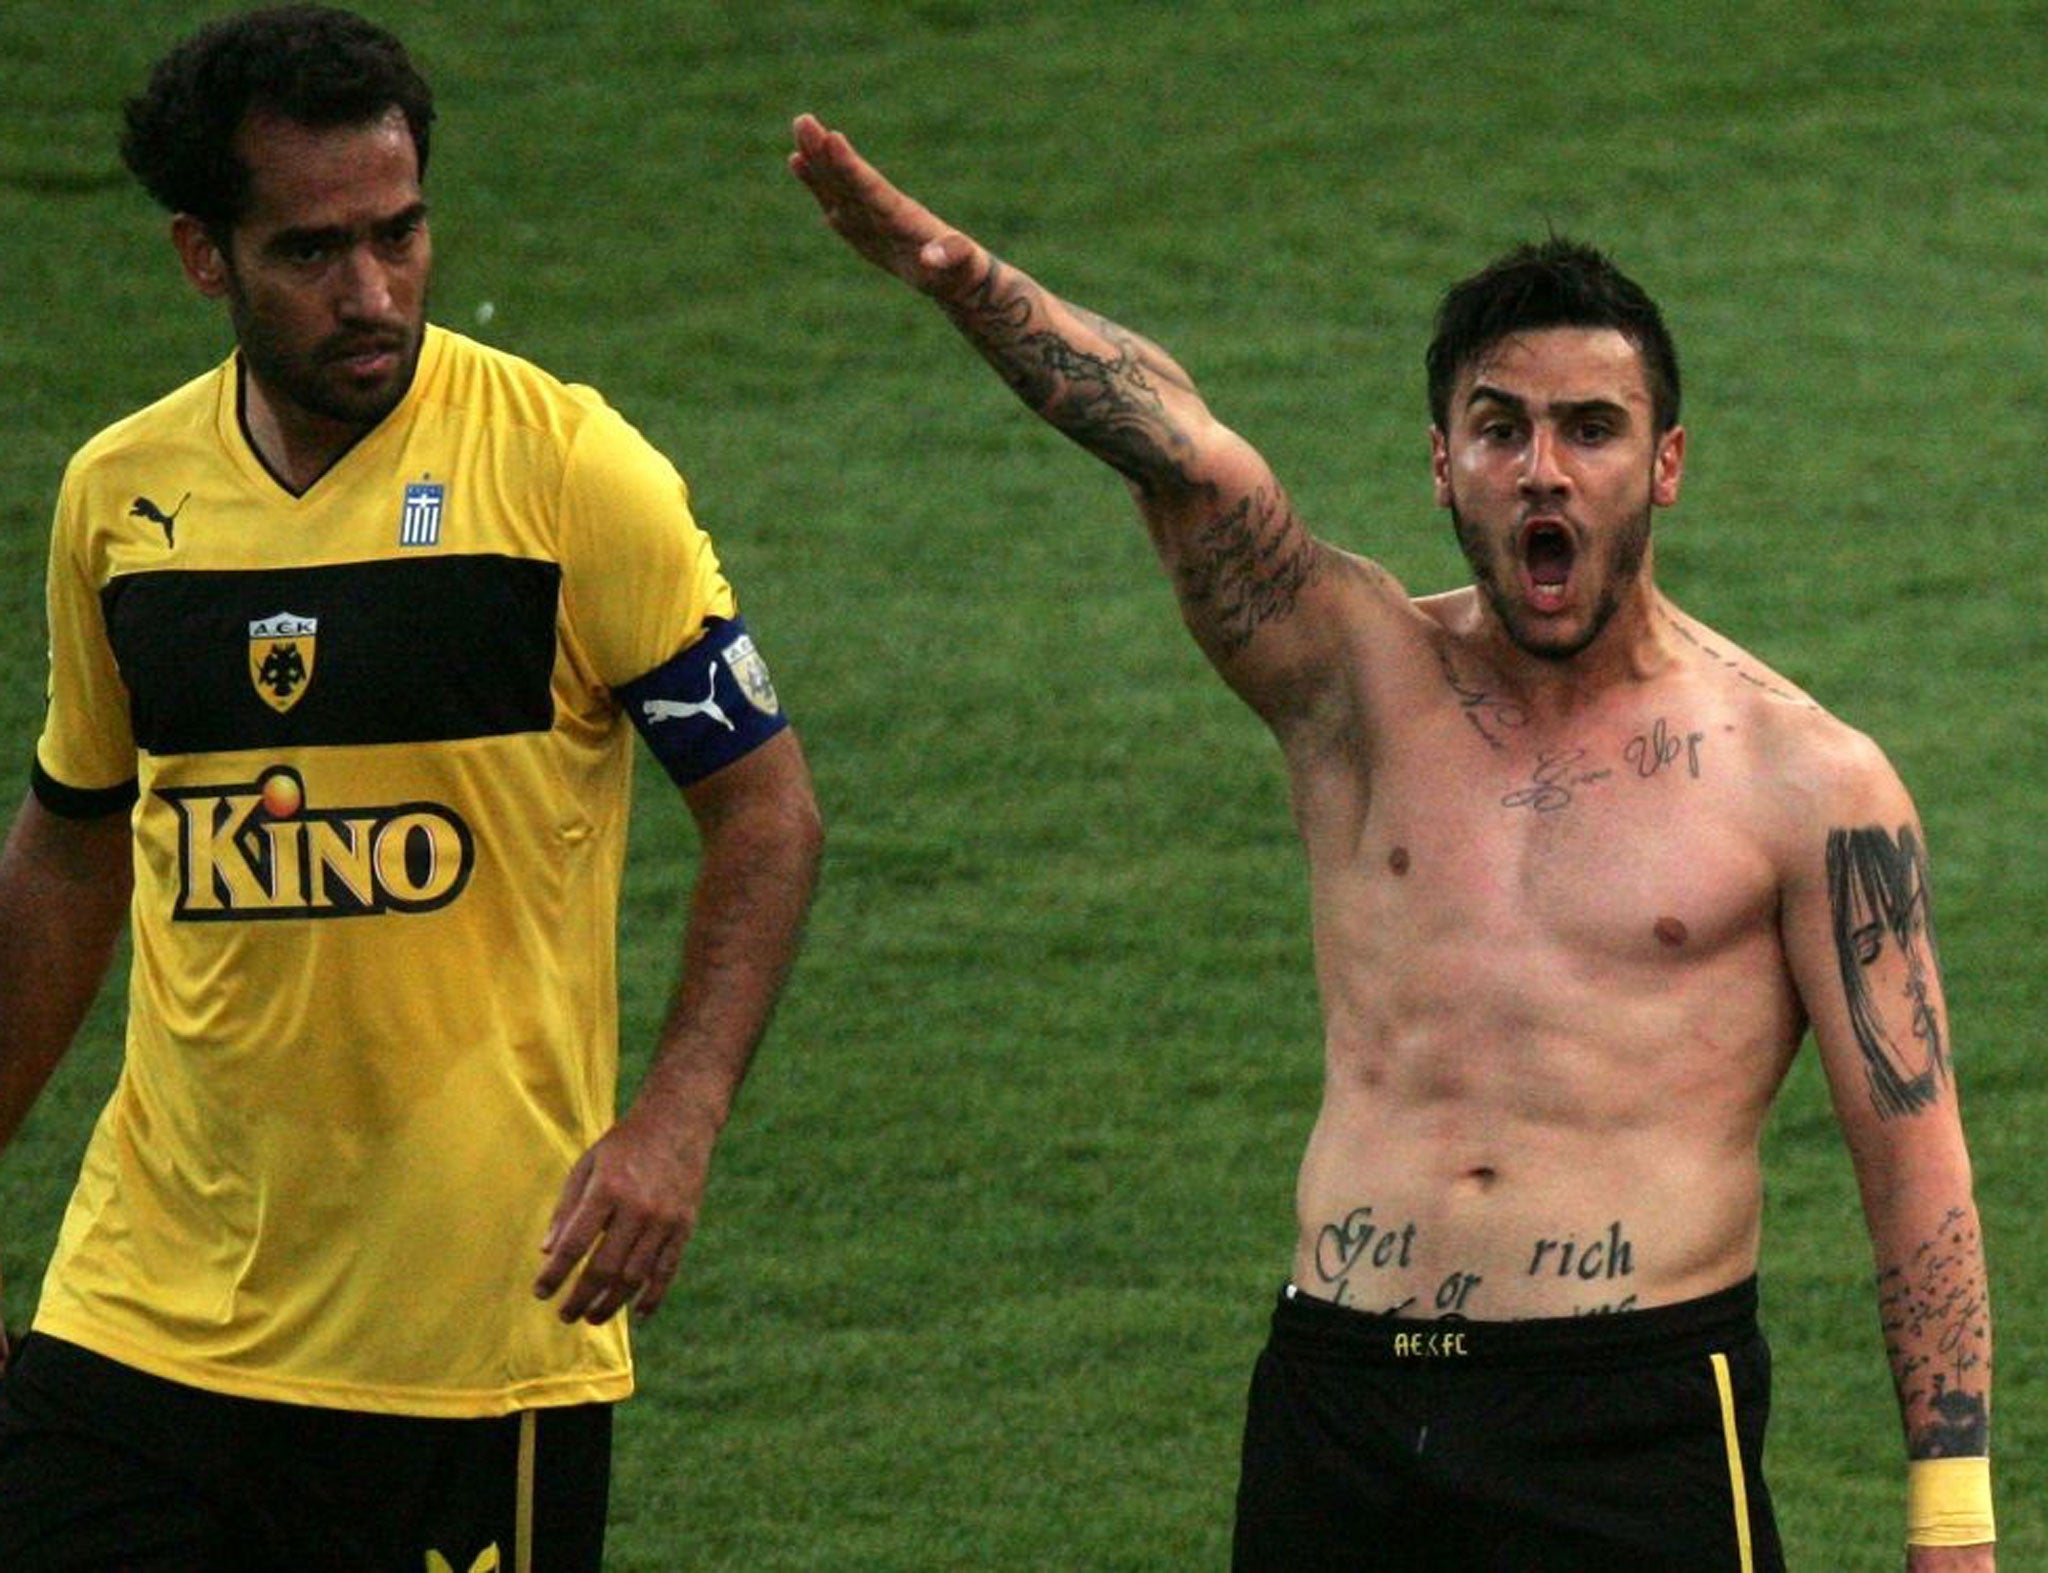 Giorgos Katidis gives what appears to be a fascist salute after scoring his side's winning goal against Veria, as his Brazilian team mate Roger Guerreiro looks on